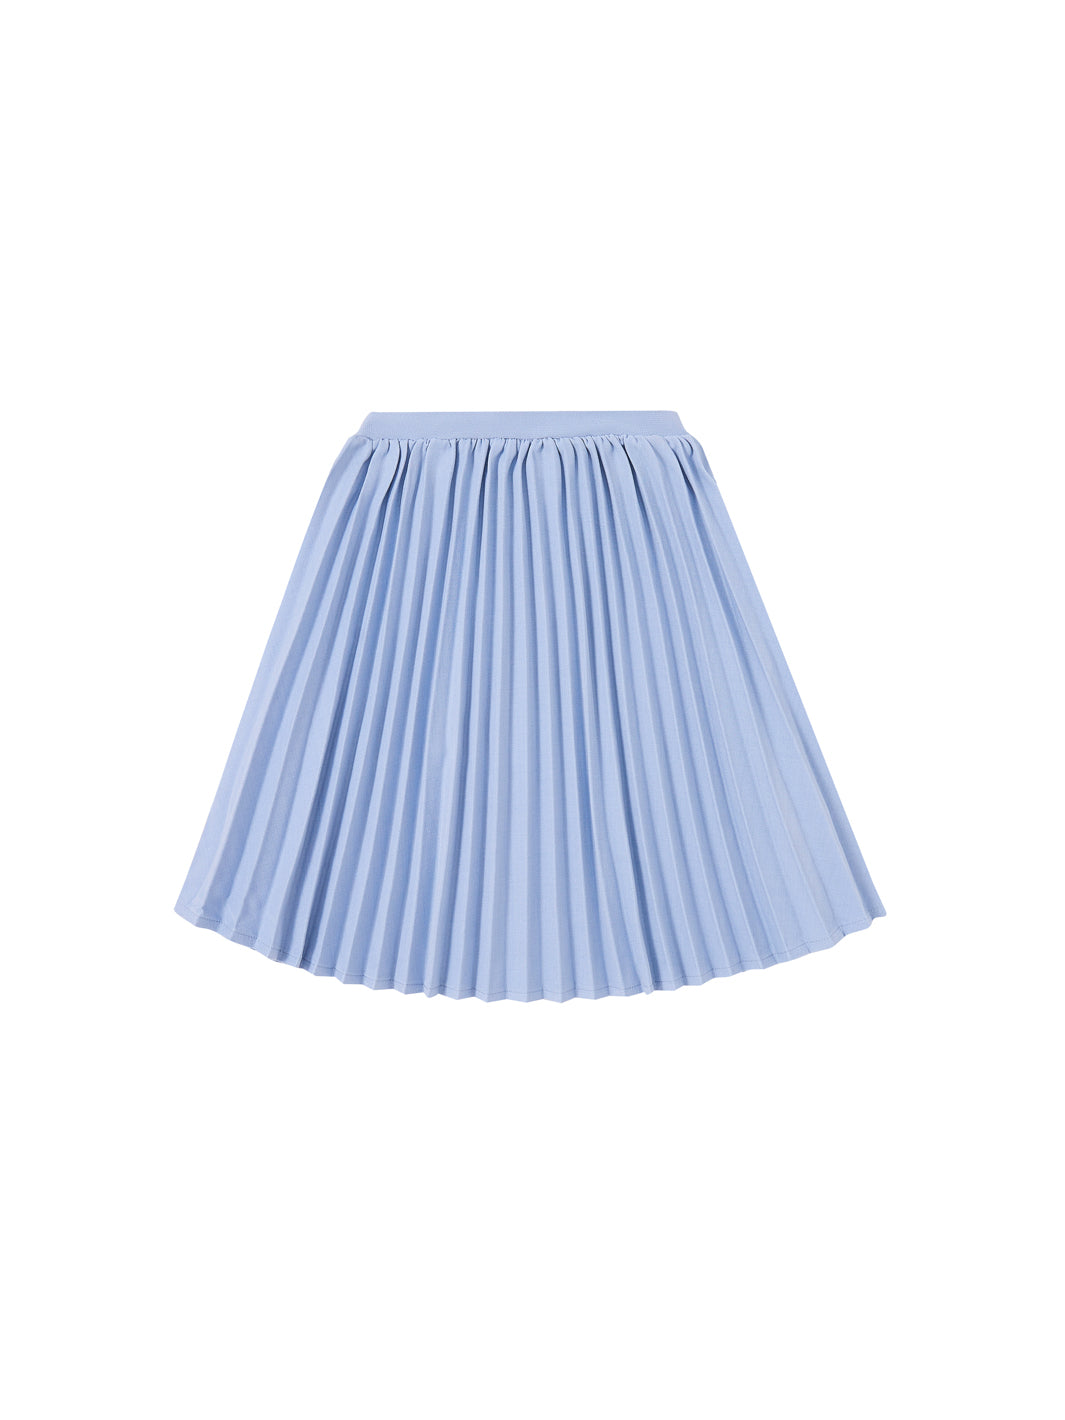 Solid Accordion Pleated Skirt - Lt. Blue